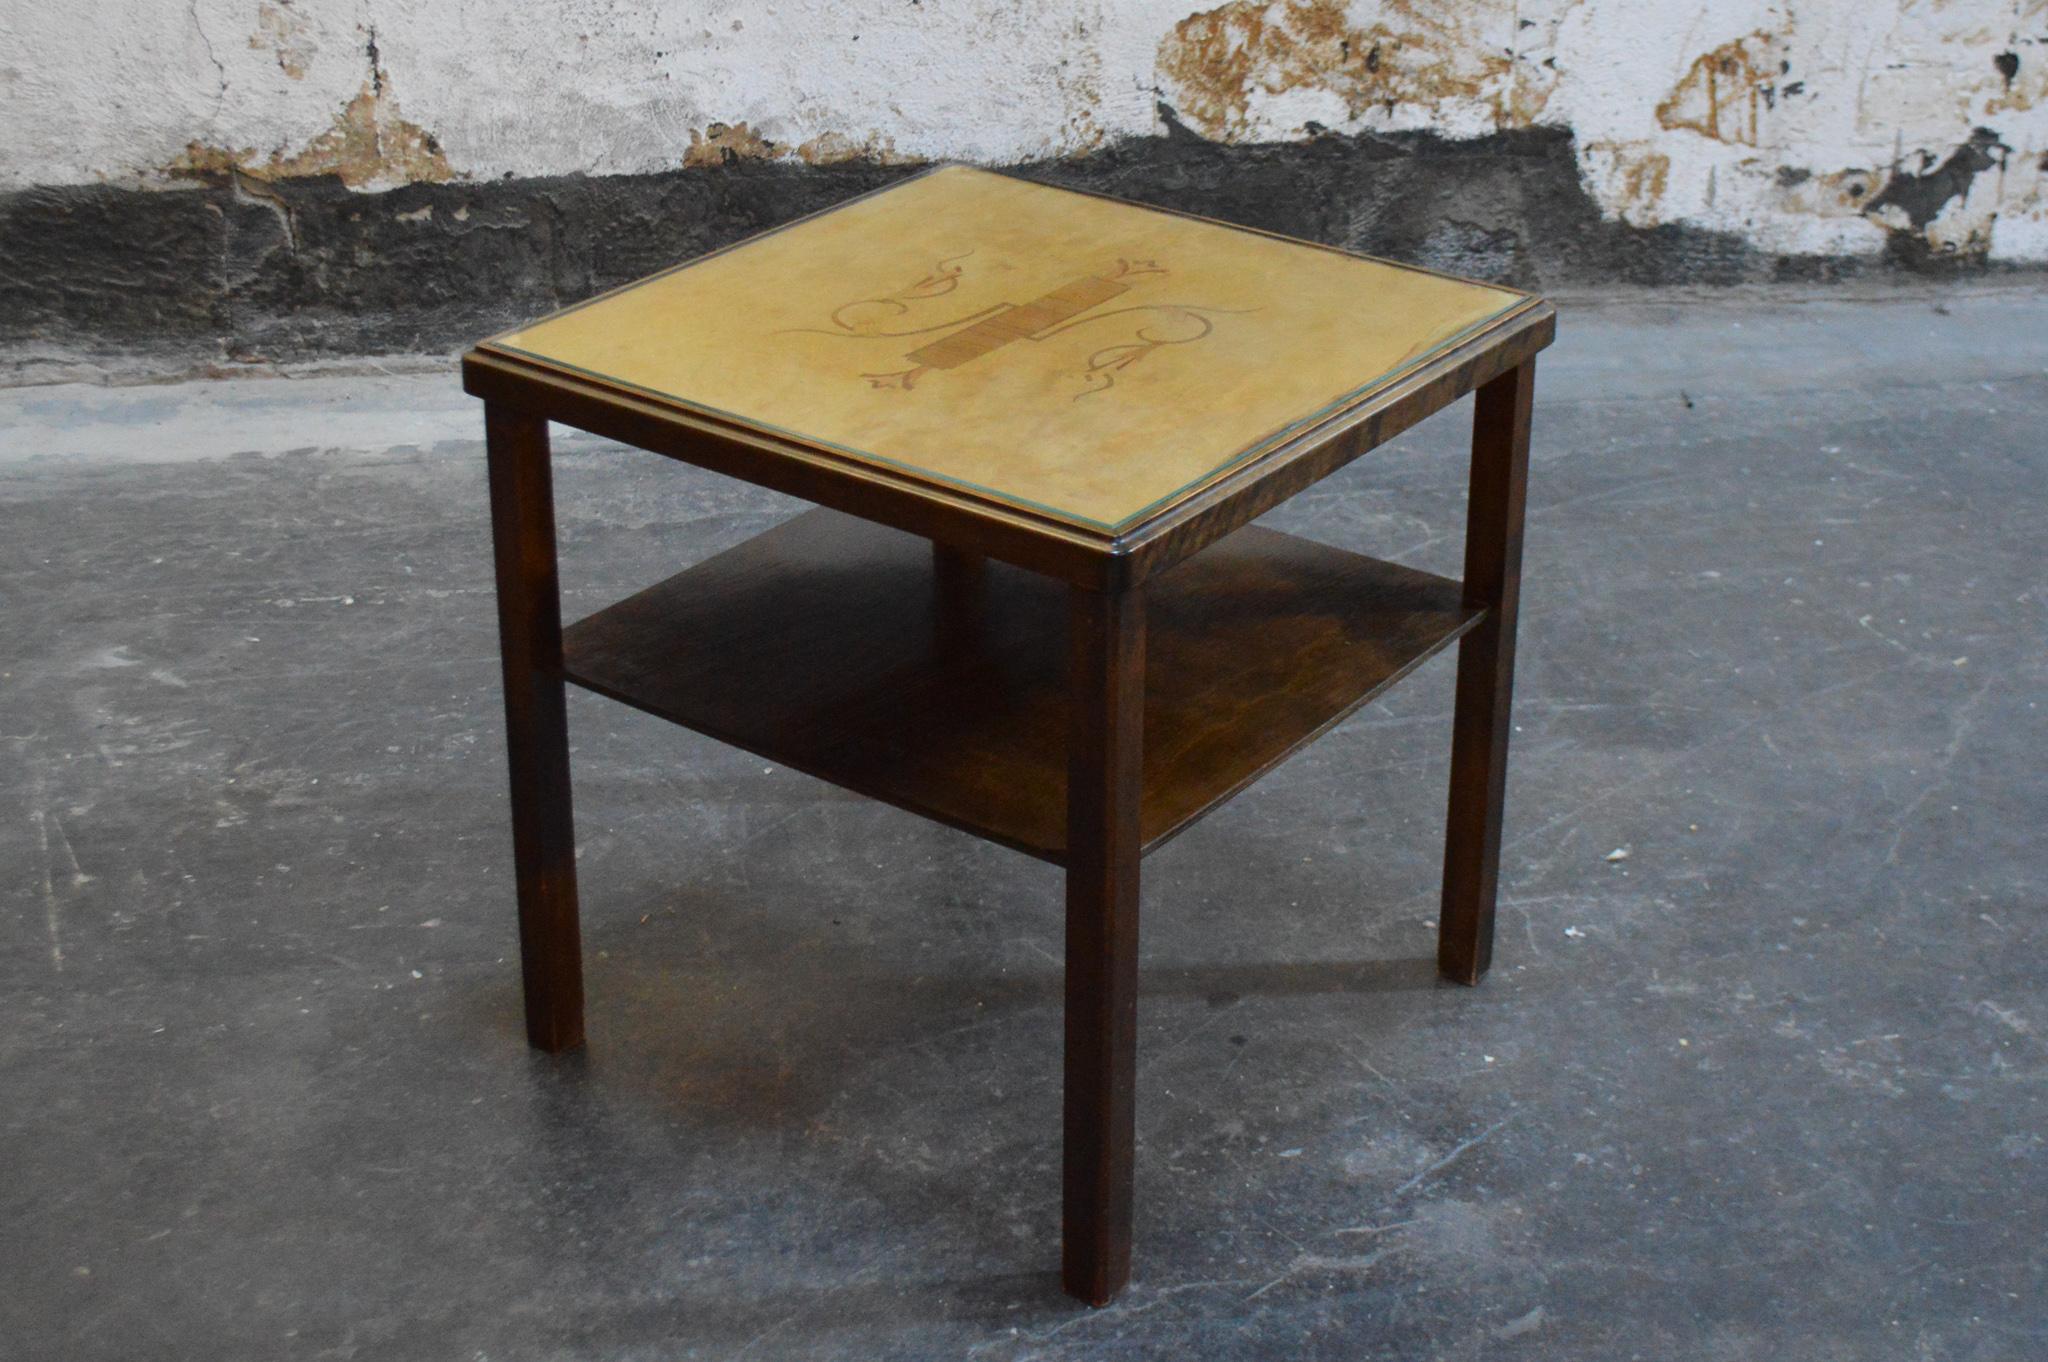 Swedish Deco end or side table with a golden birch top with elm inlay and a dark flame birch base. The table top is paneled and inlaid with intarsia of elm and jacaranda with a glass top and it has a dark flame birch shelf. It is the perfect size